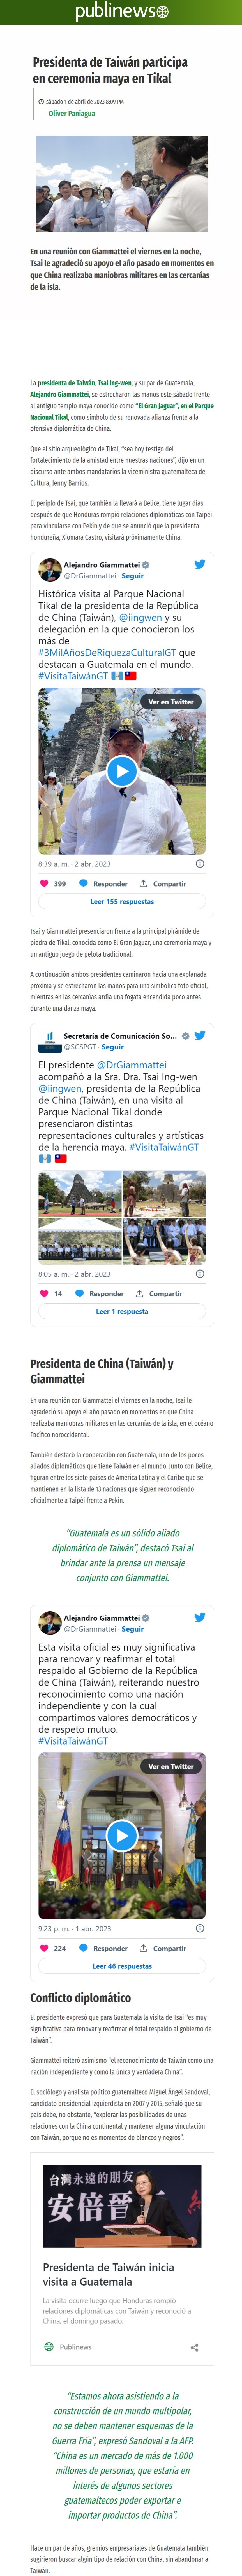 Taiwan’s president participates in Mayan ceremony in Tikal